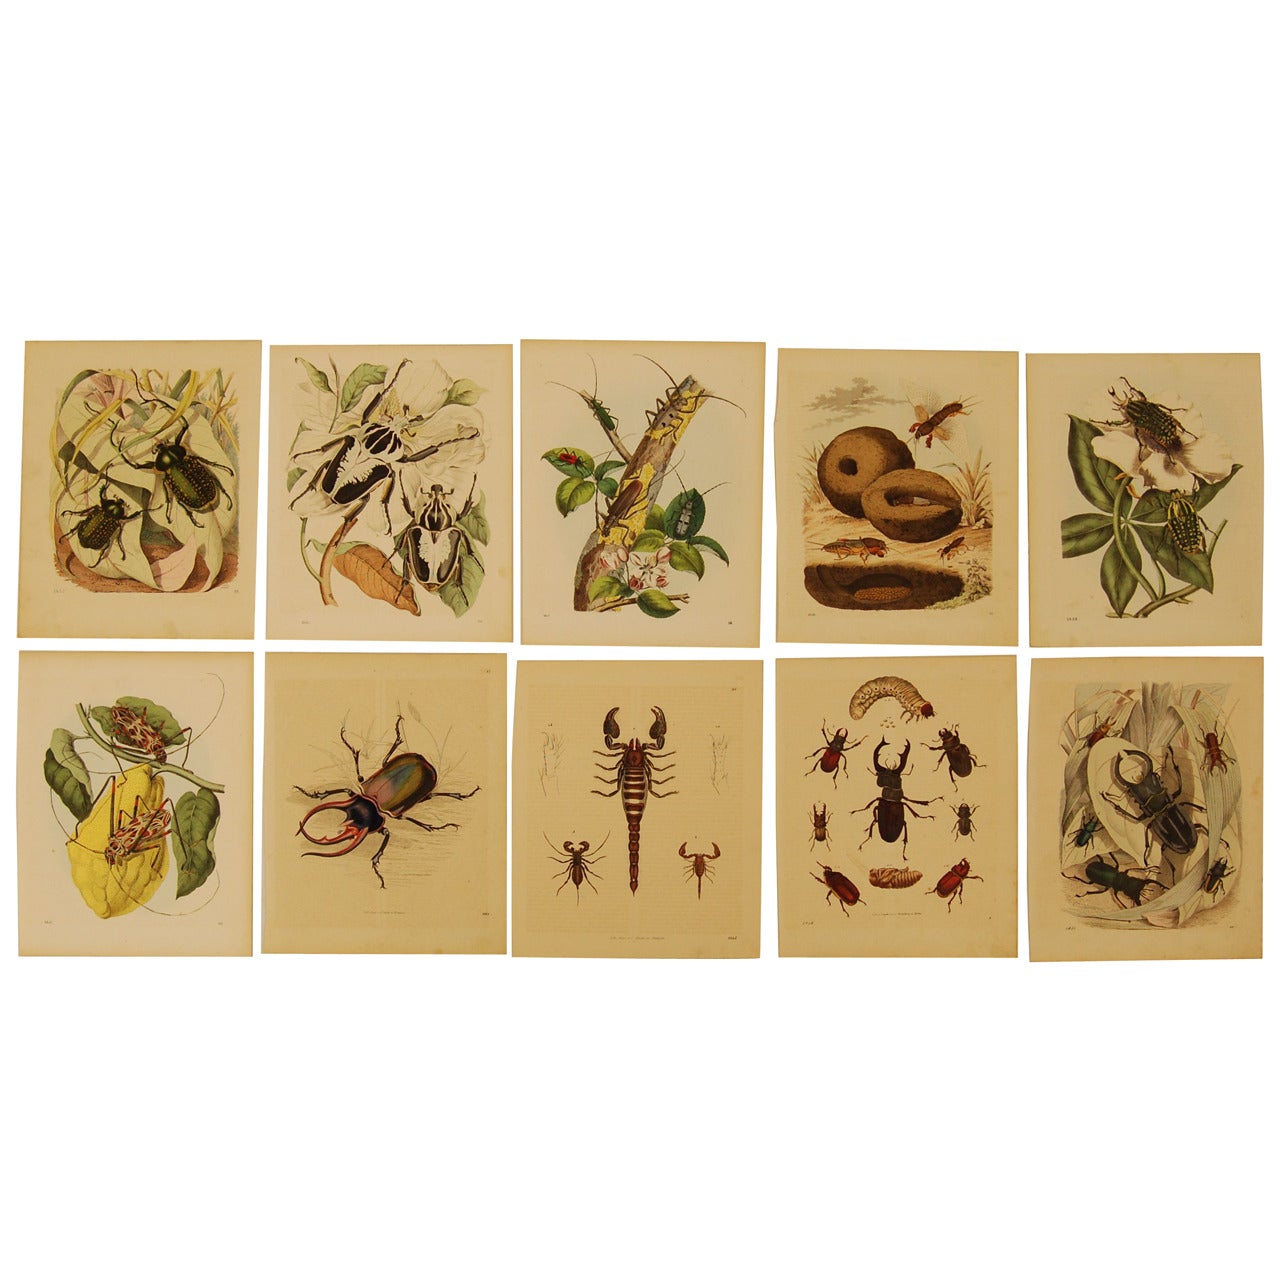 Setof Ten German 19th Century Hand-Colored Lithographs of Beetles